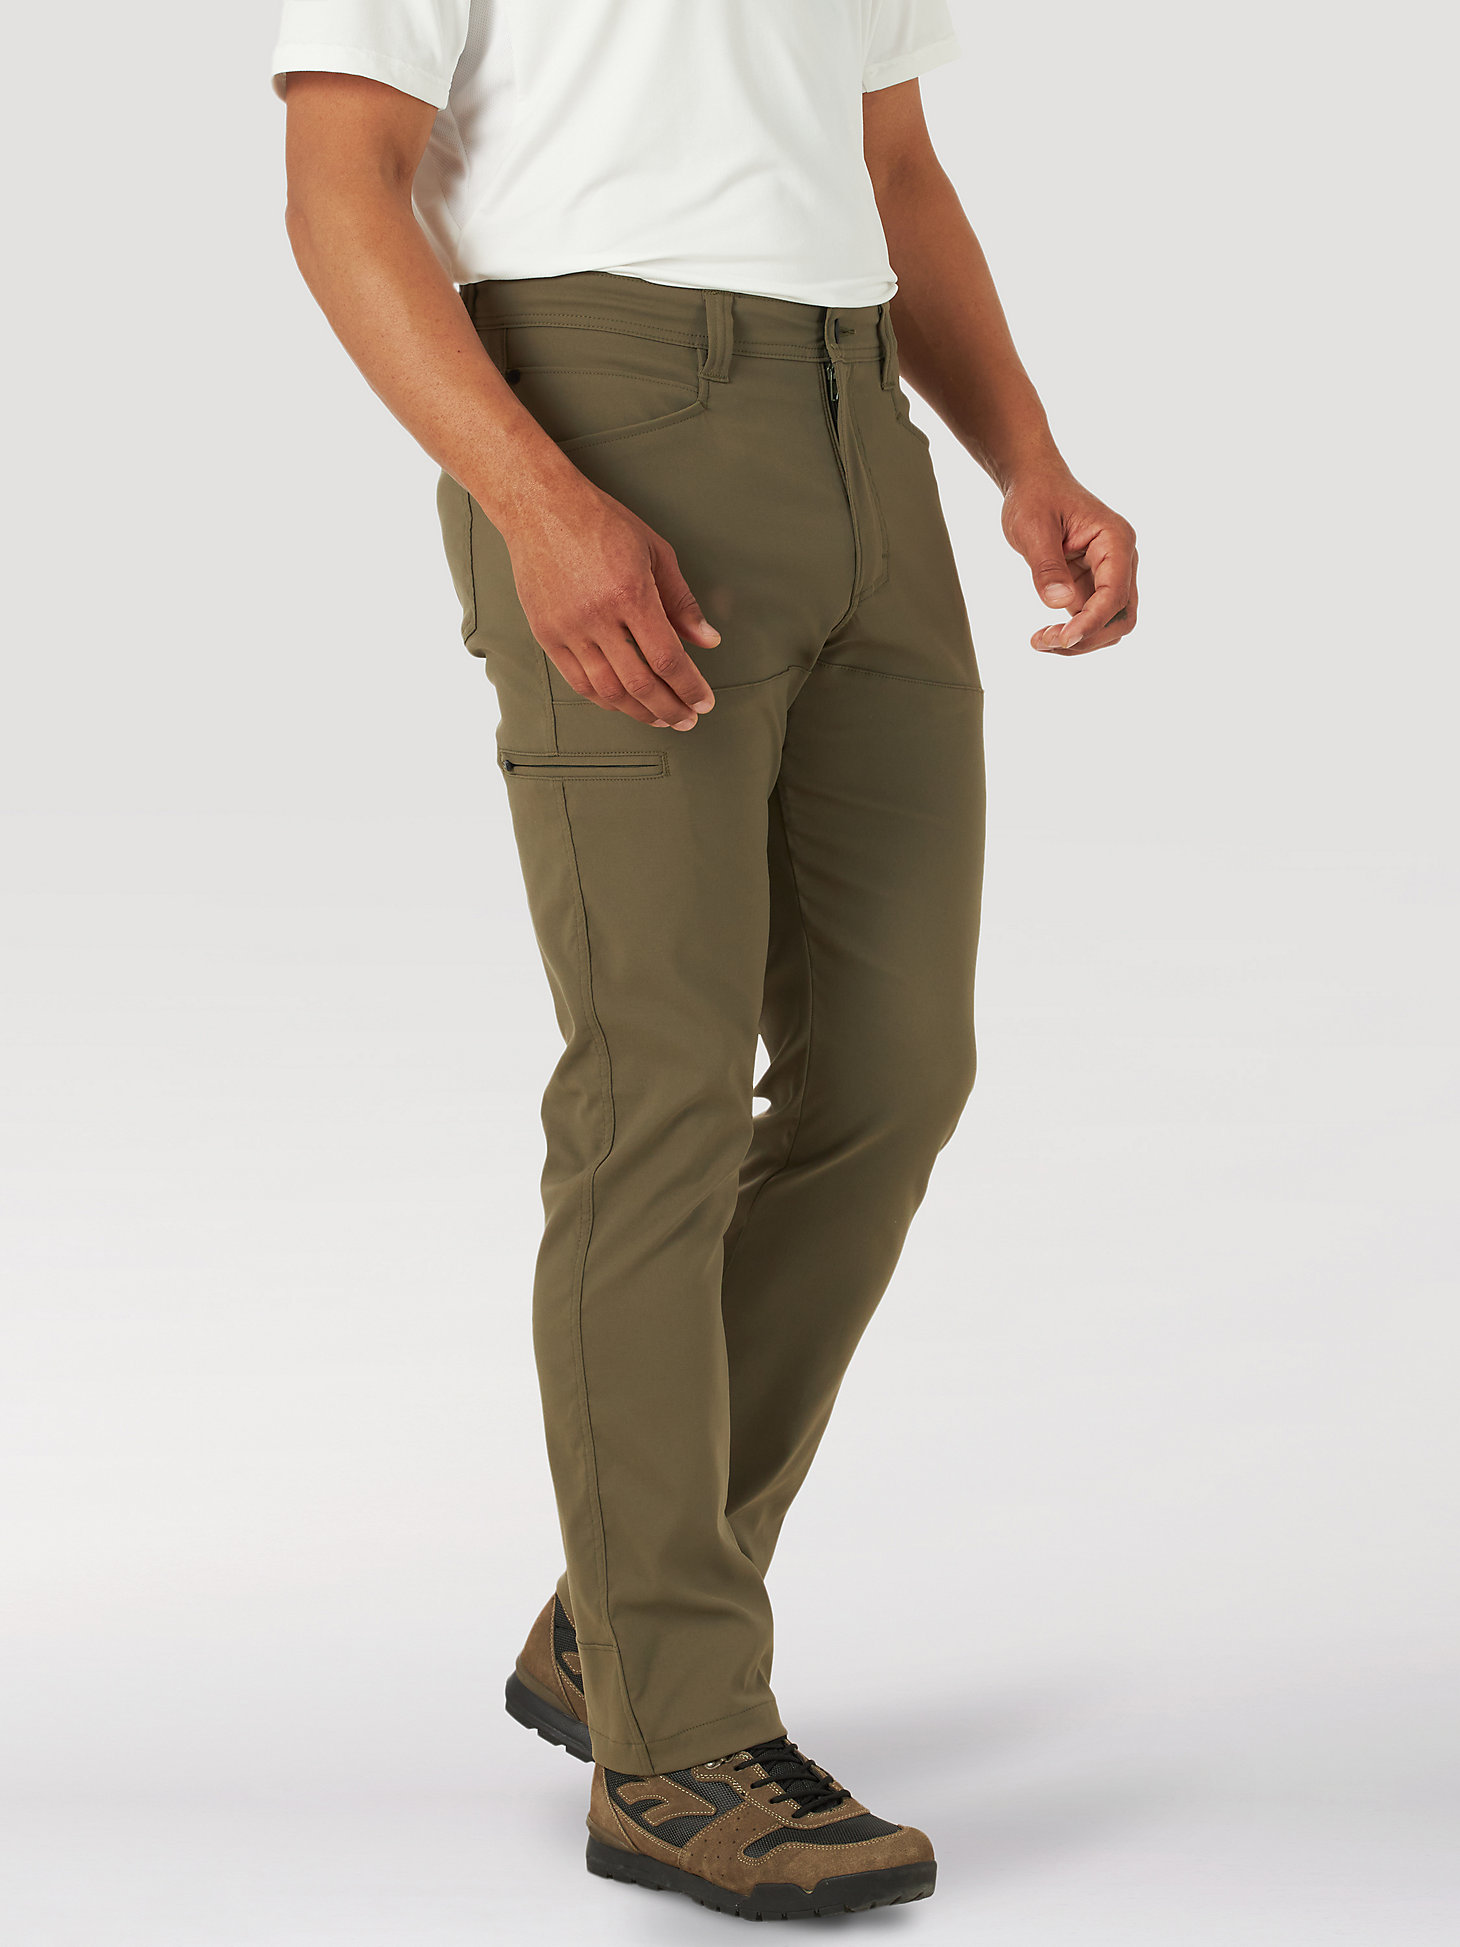 ATG by Wrangler™ Men's Synthetic Utility Pant in Sea Turtle alternative view 2